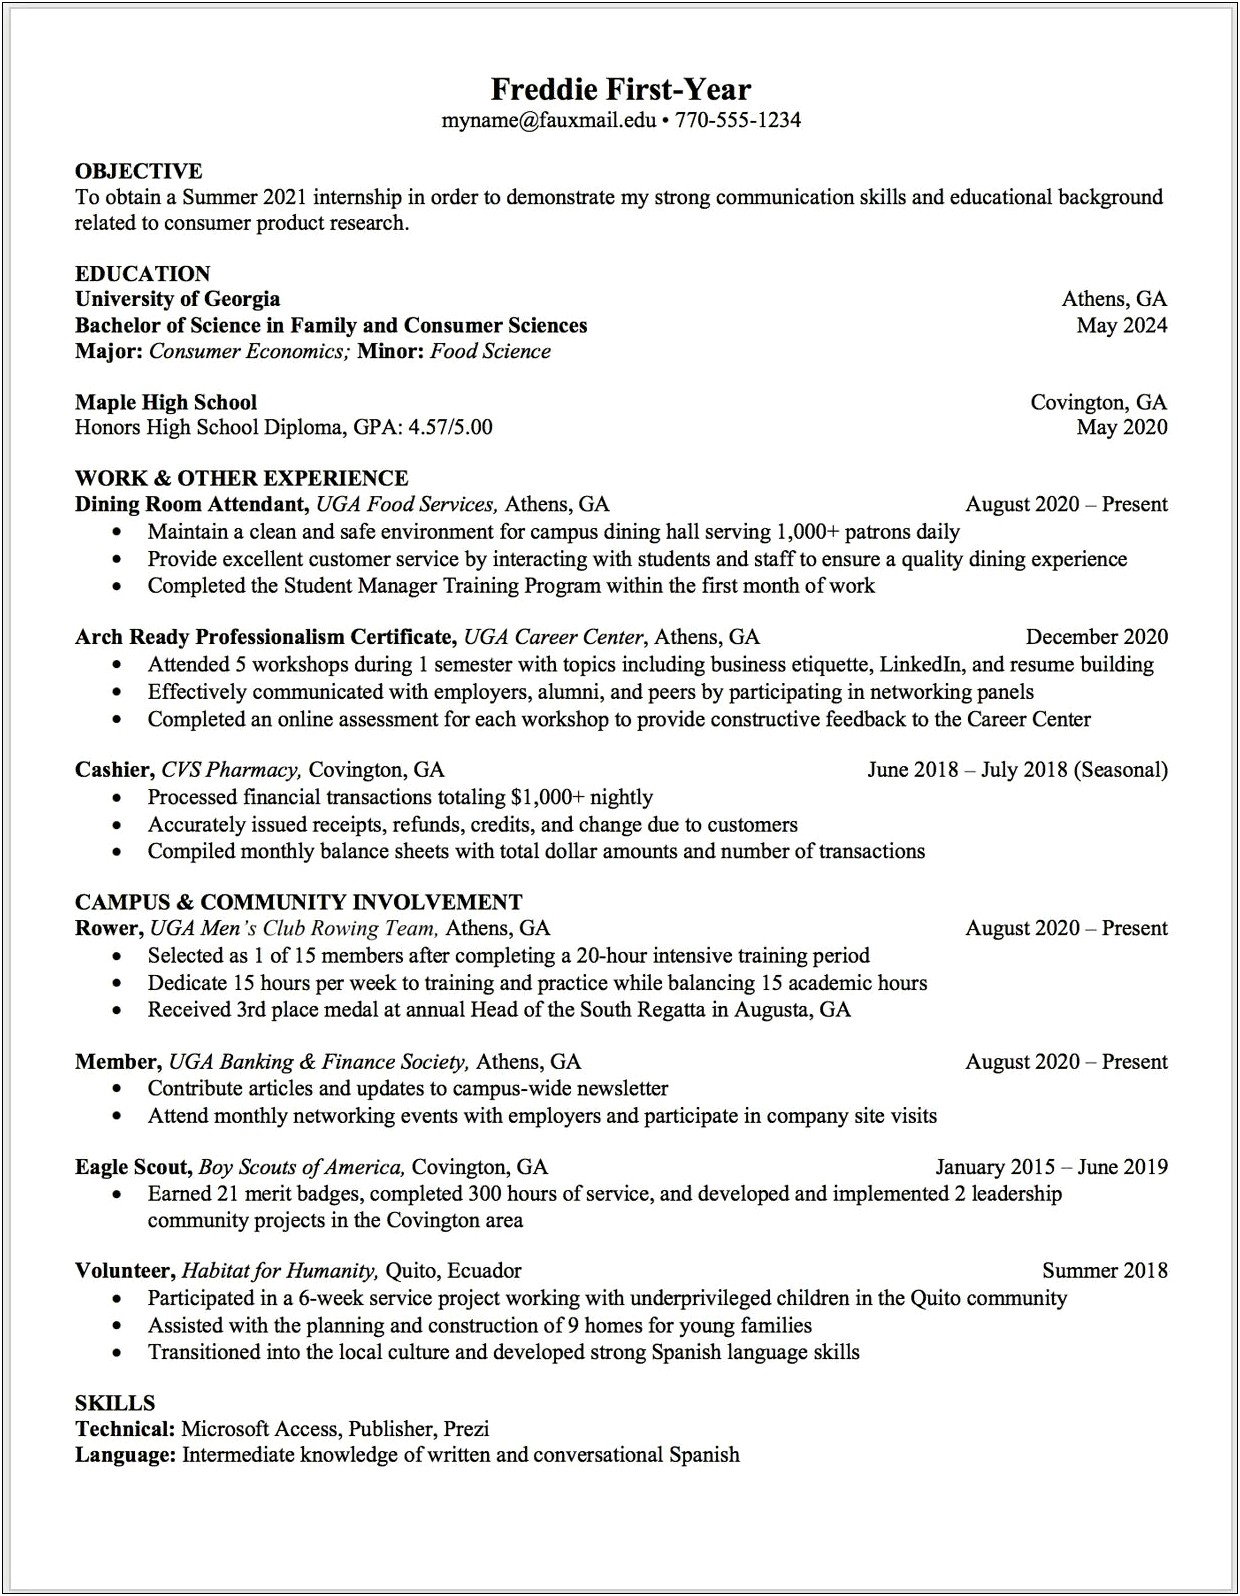 Resume To Get First Educational Leadership Job